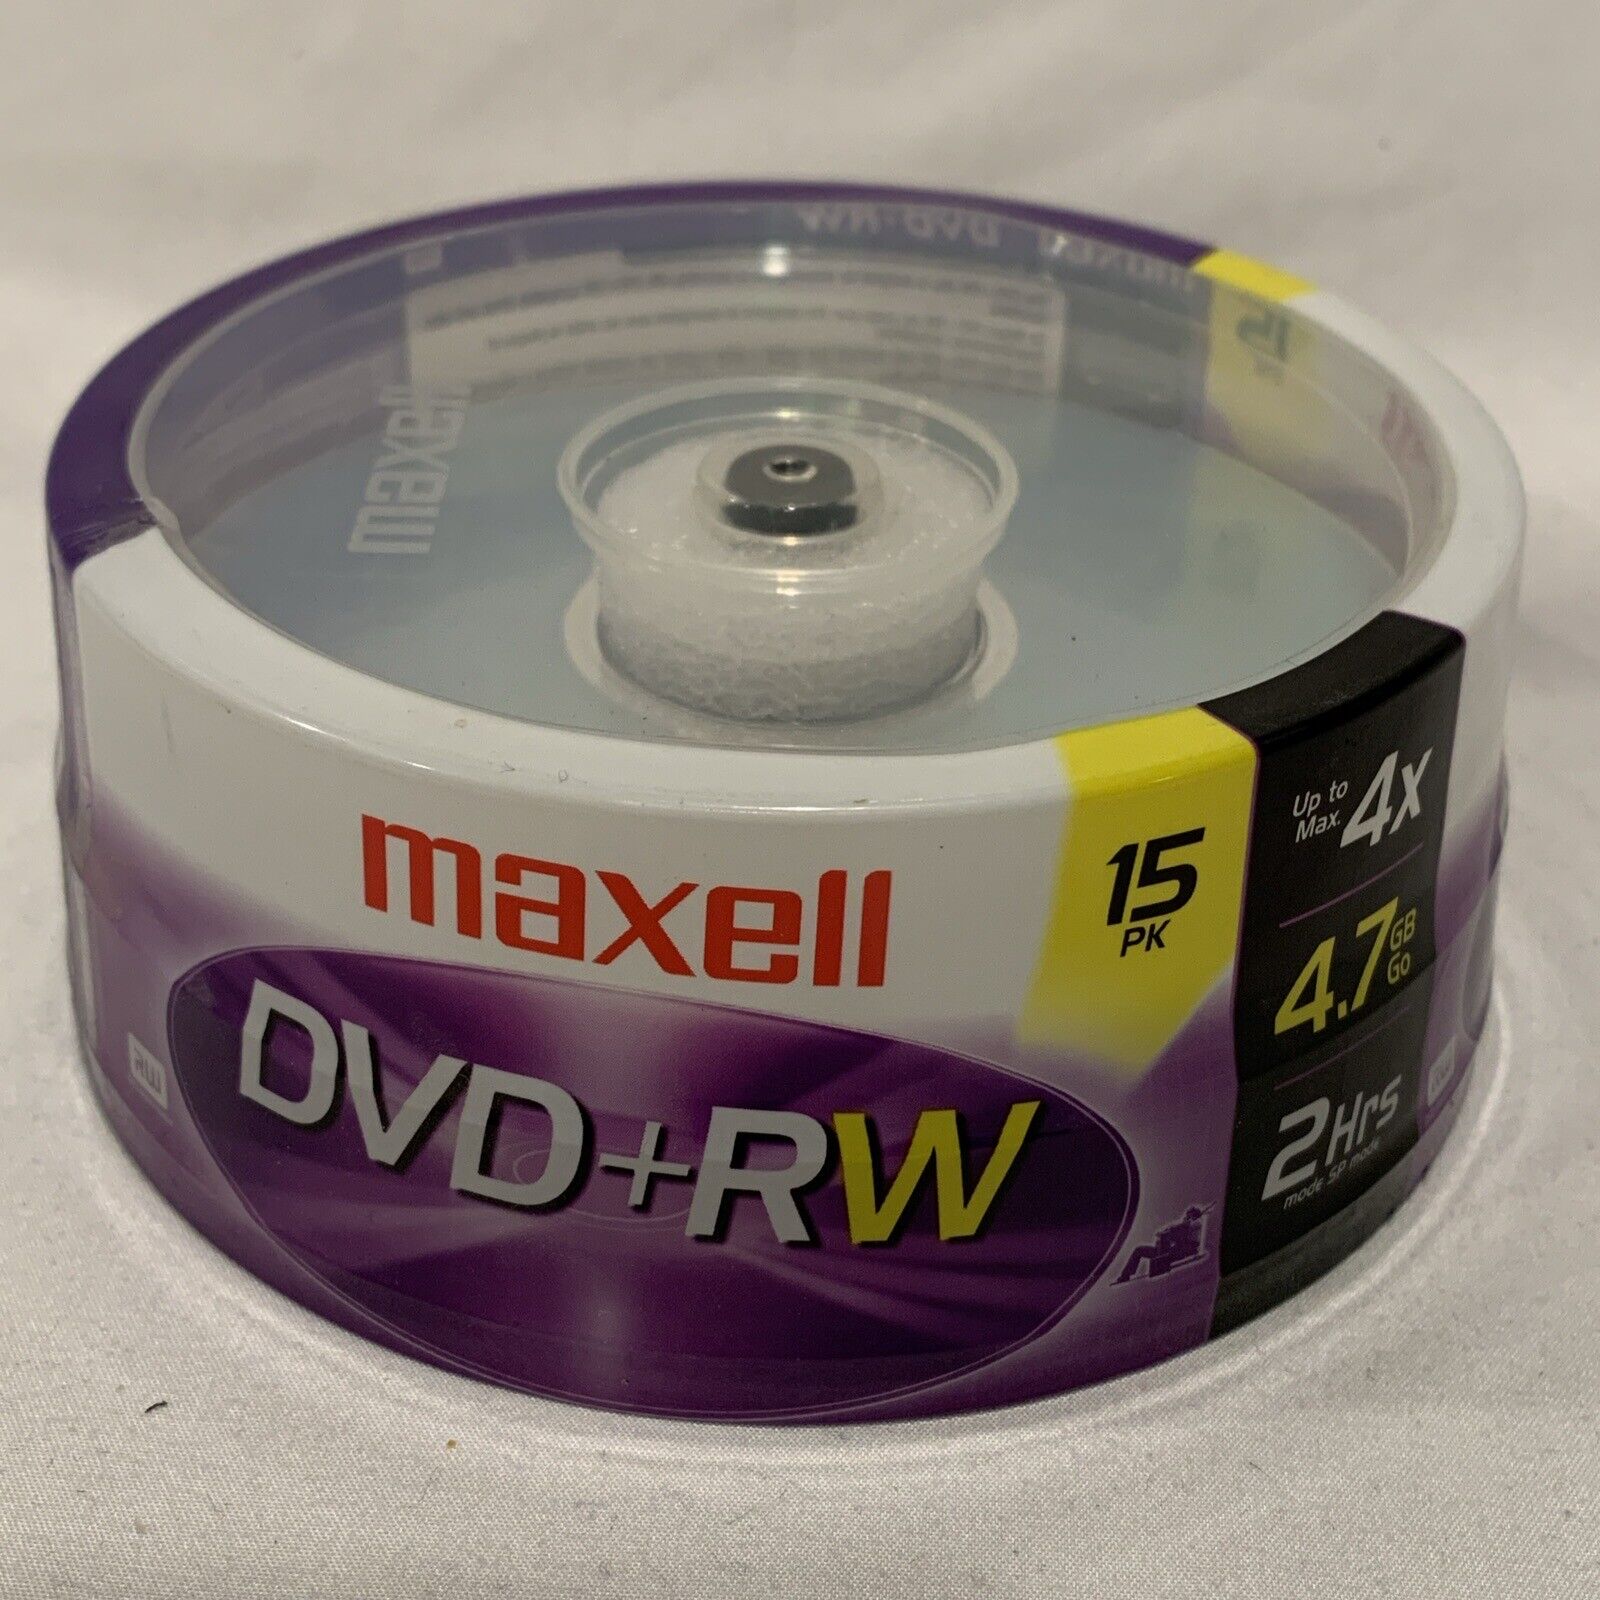 Maxell DVD+RW Discs 4X 4.7GB 2Hrs Spindle Case 15 Pack NIB Sealed Brand New